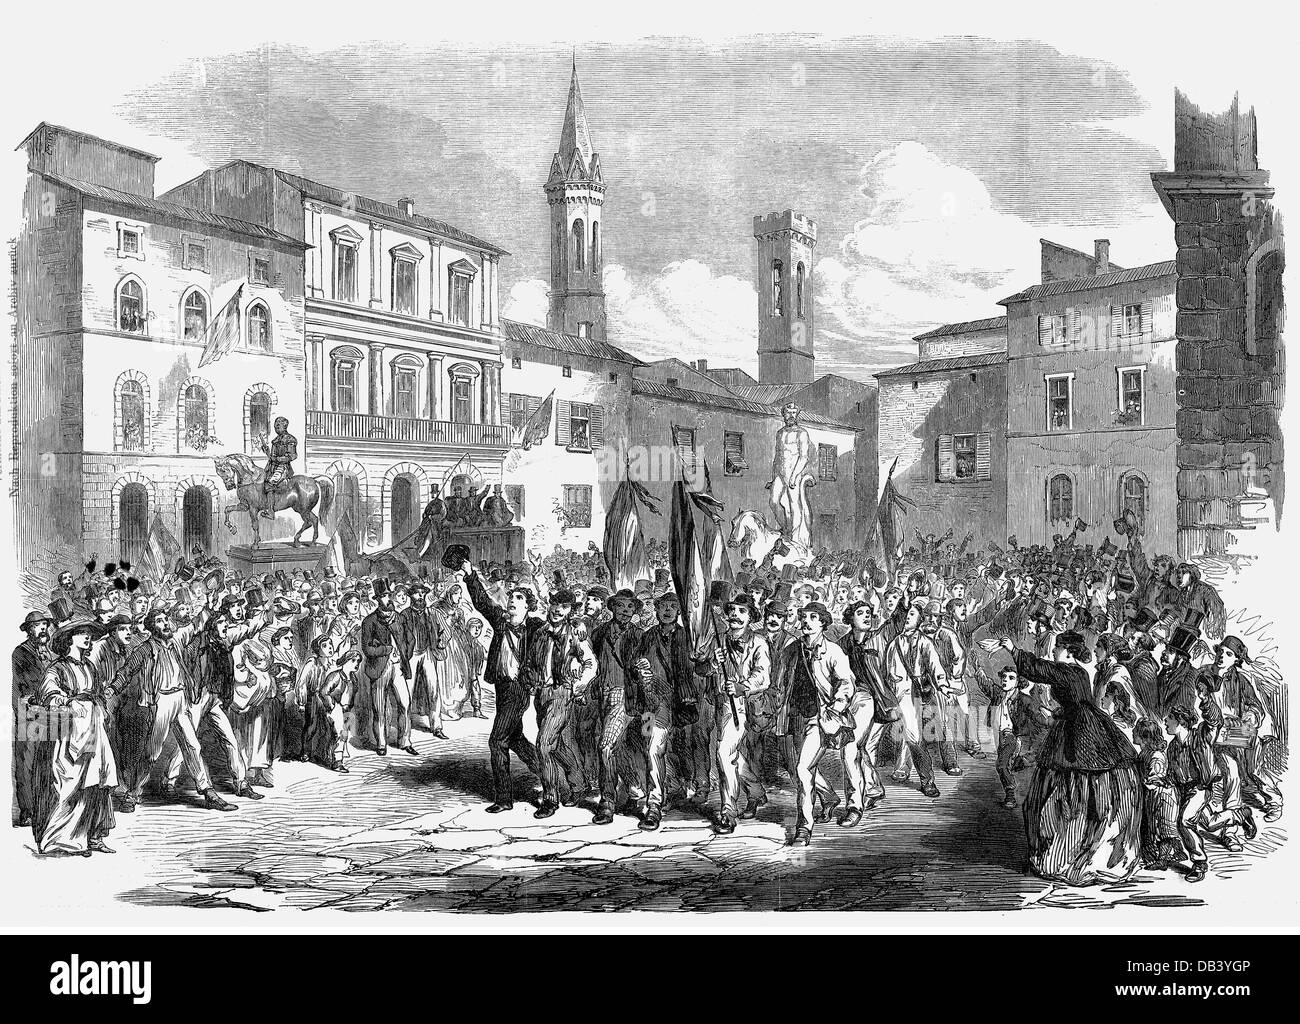 Italy, Wars of Italian Independence, volunteers of Giuseppe Garibaldi's army at the Piazza dell'Indipendenza, Florence, 1866, Additional-Rights-Clearences-Not Available Stock Photo